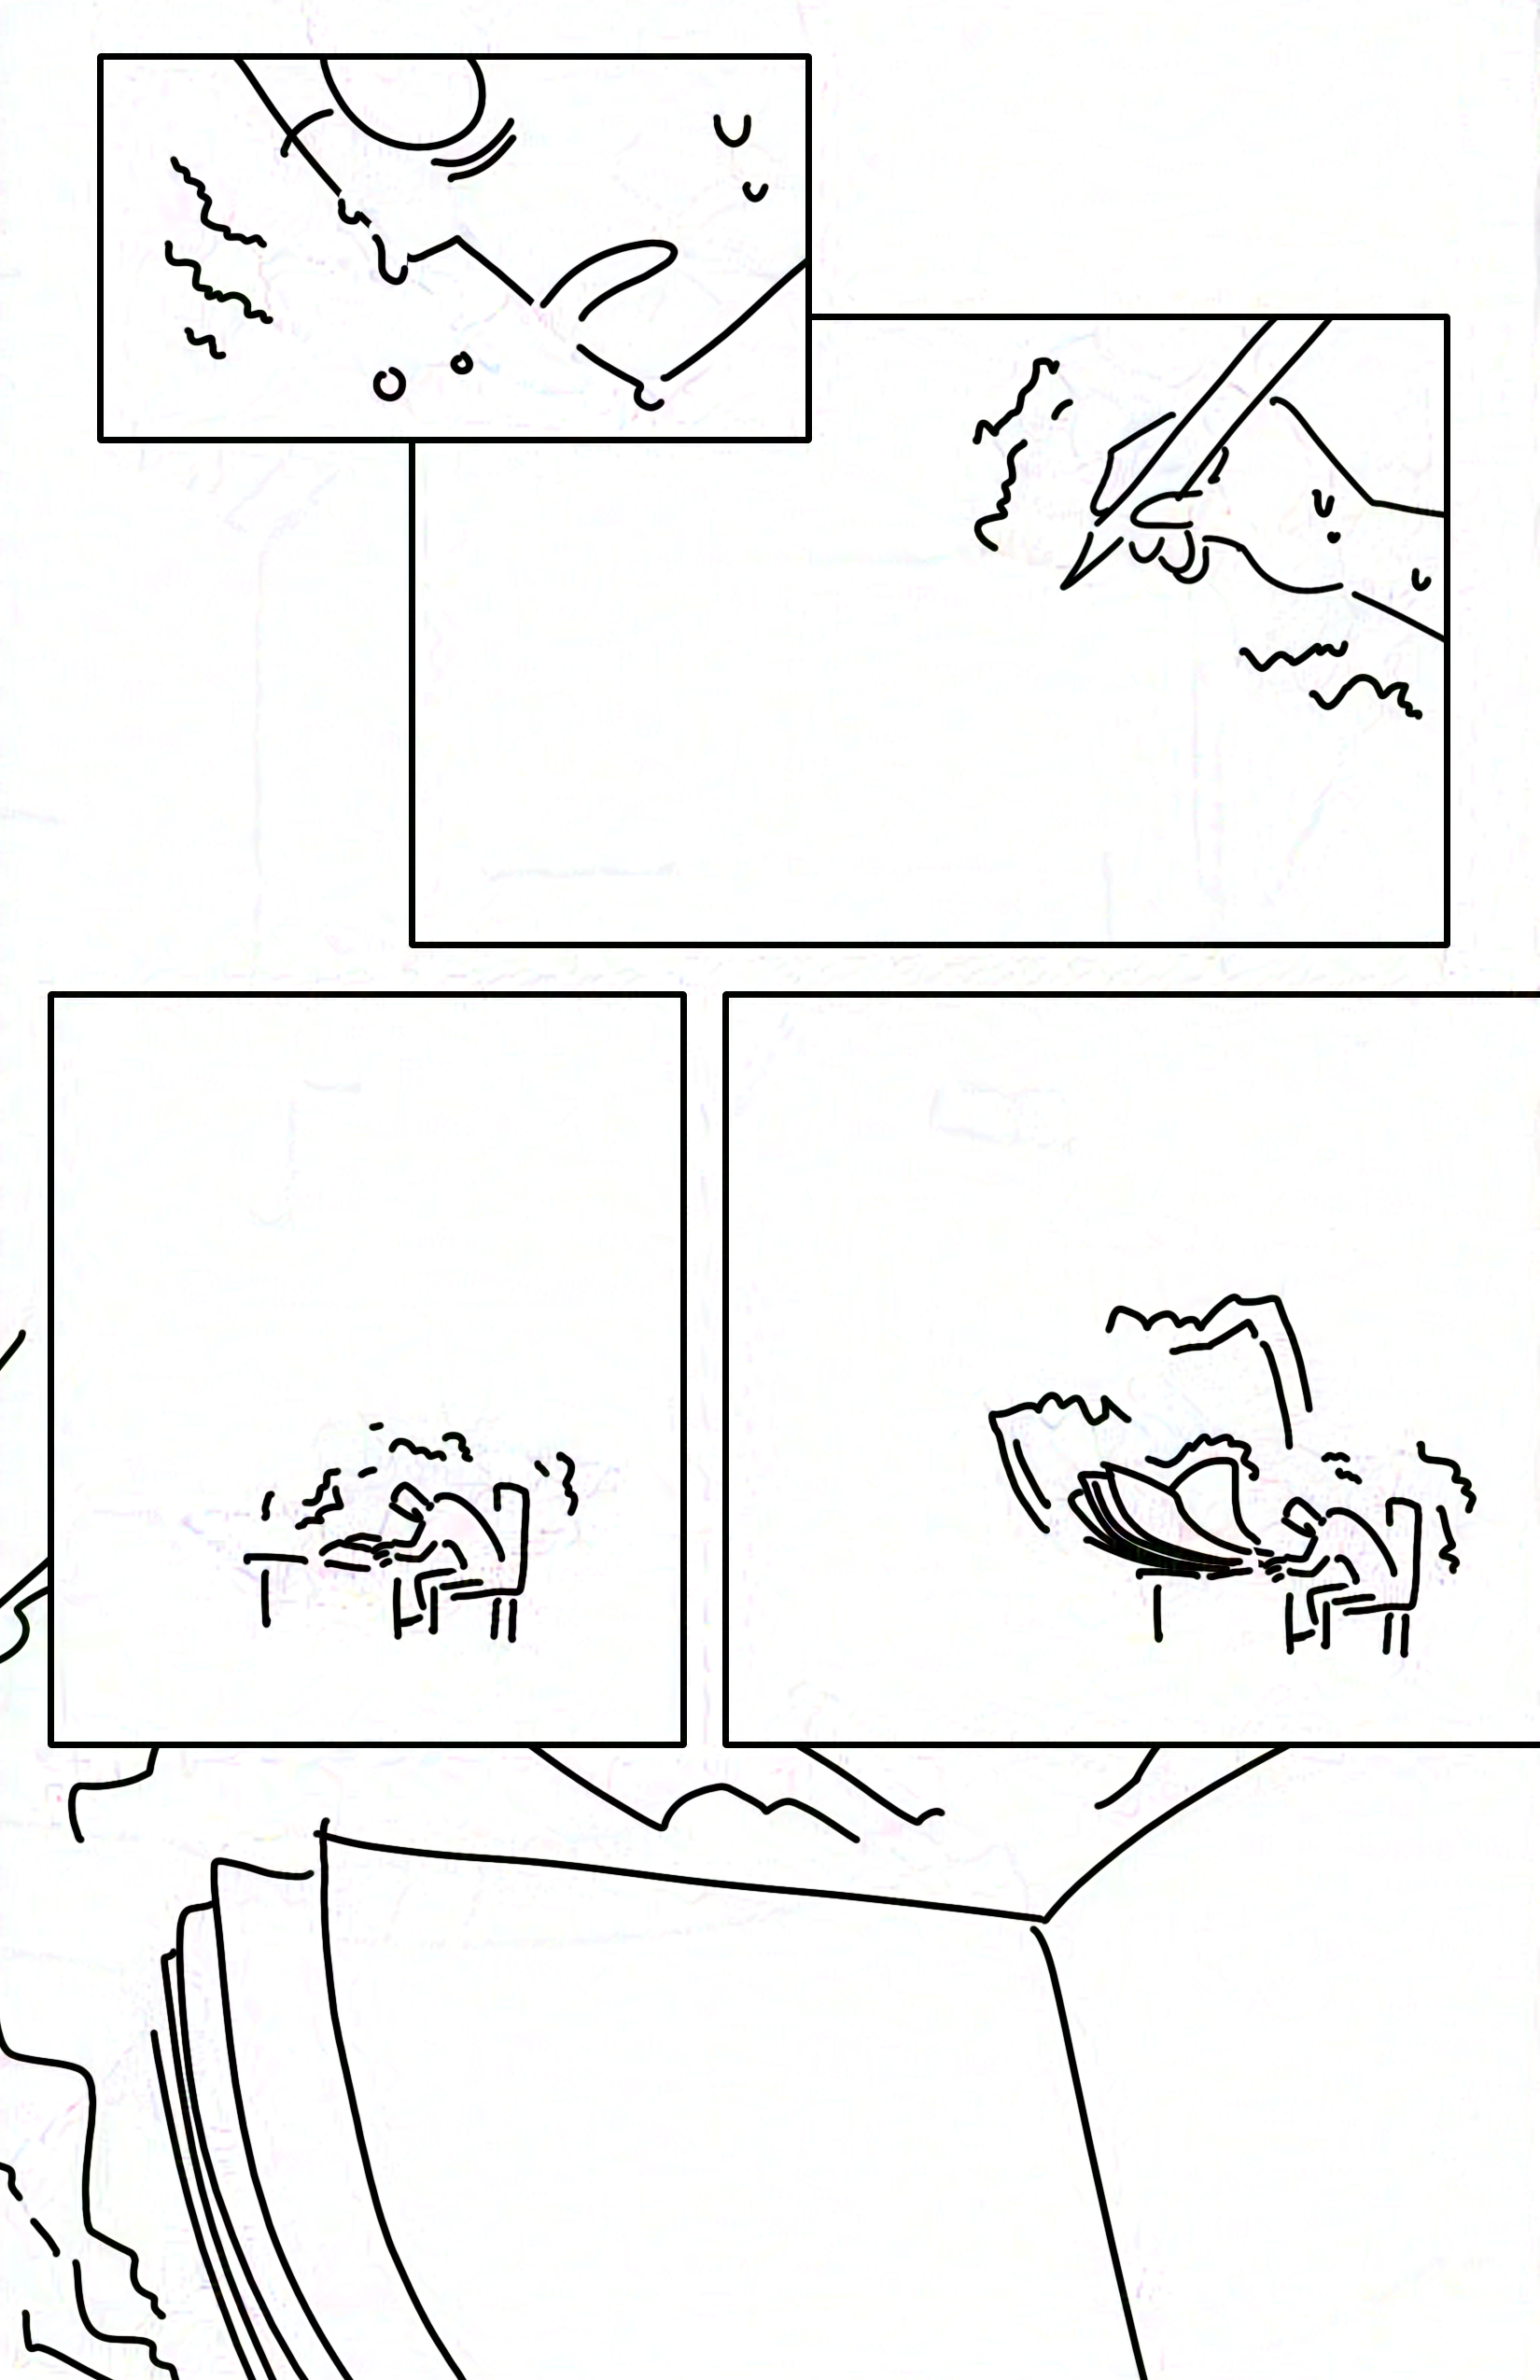 Panel 1: Close-up on the librarian's face as they sweat and shake. Their mouth is slightly open in a frown and there are eyebags under their glasses.
Panel 2: Their hand shakes and sweats as it hovers a pencil over the blank page.
Panel 3: Zoom out to show the librarian shaking at their desk.
Panel 4: The shaking lines expand and so does the empty-paged book.
Panel 5: Close-up of the top half of the blank book with large shaking lines.